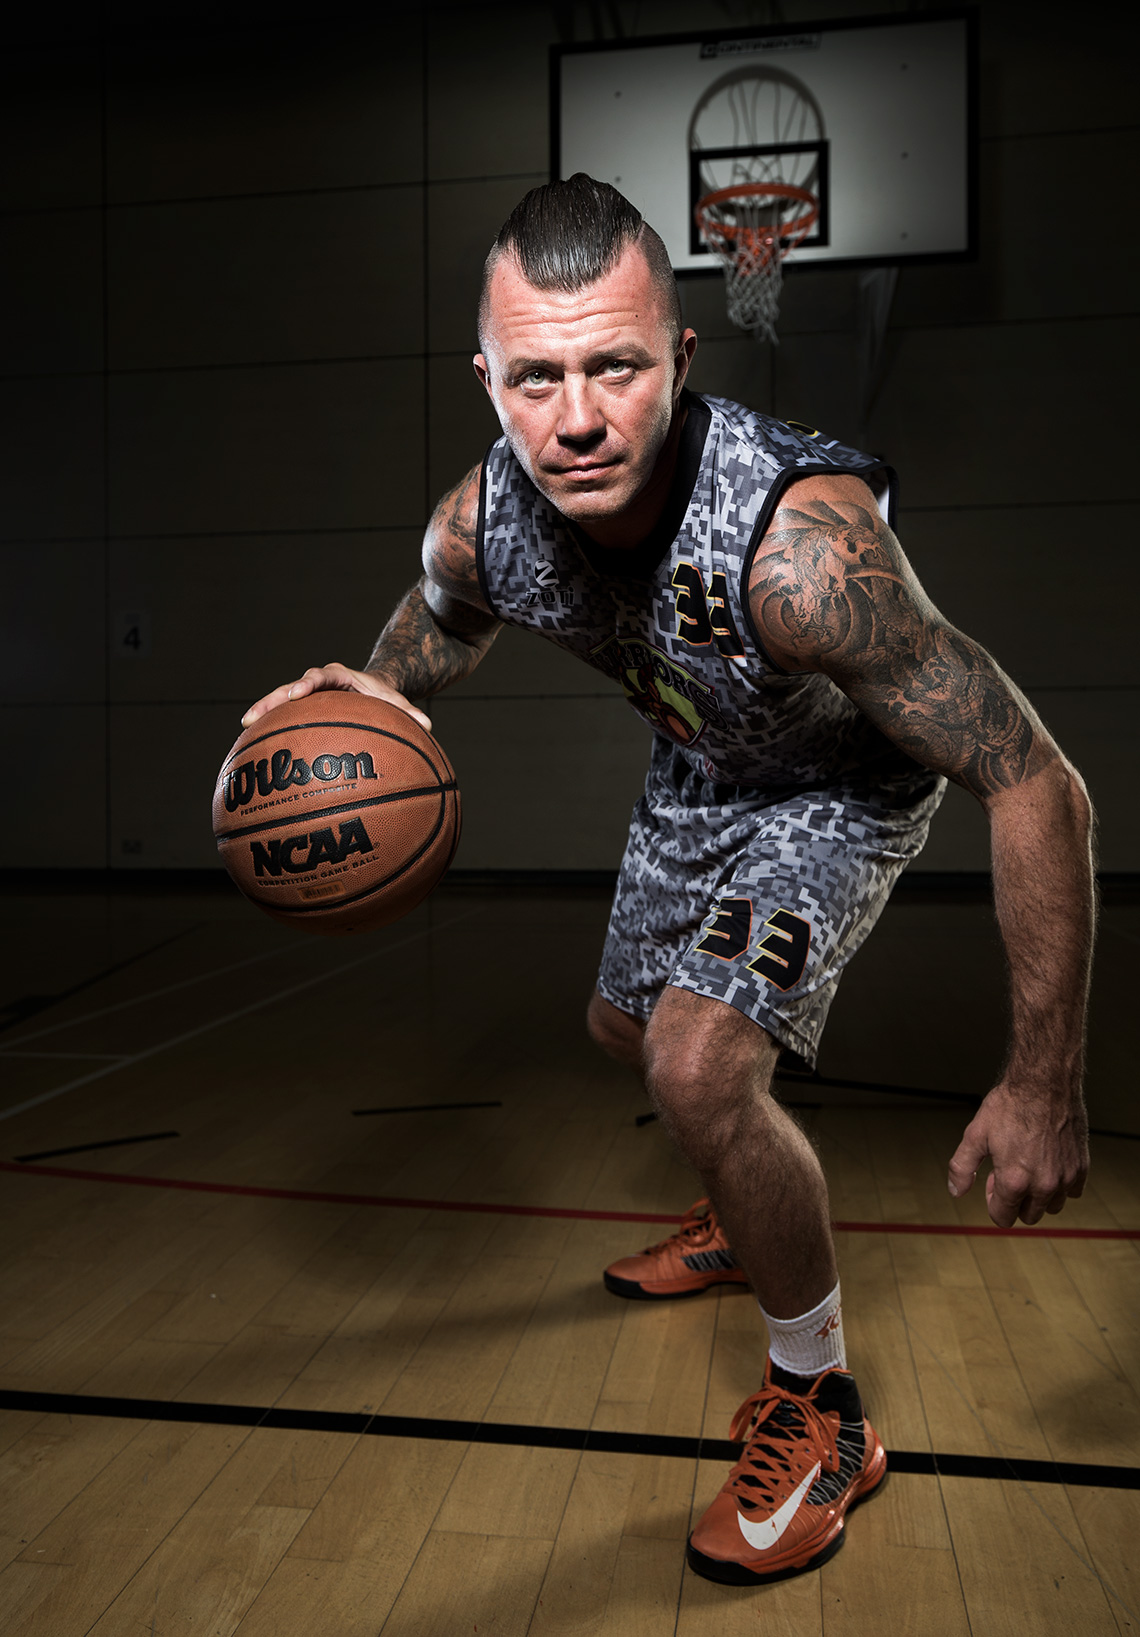 Goole warriors basketball player practicing on court shot for an editorial feature.